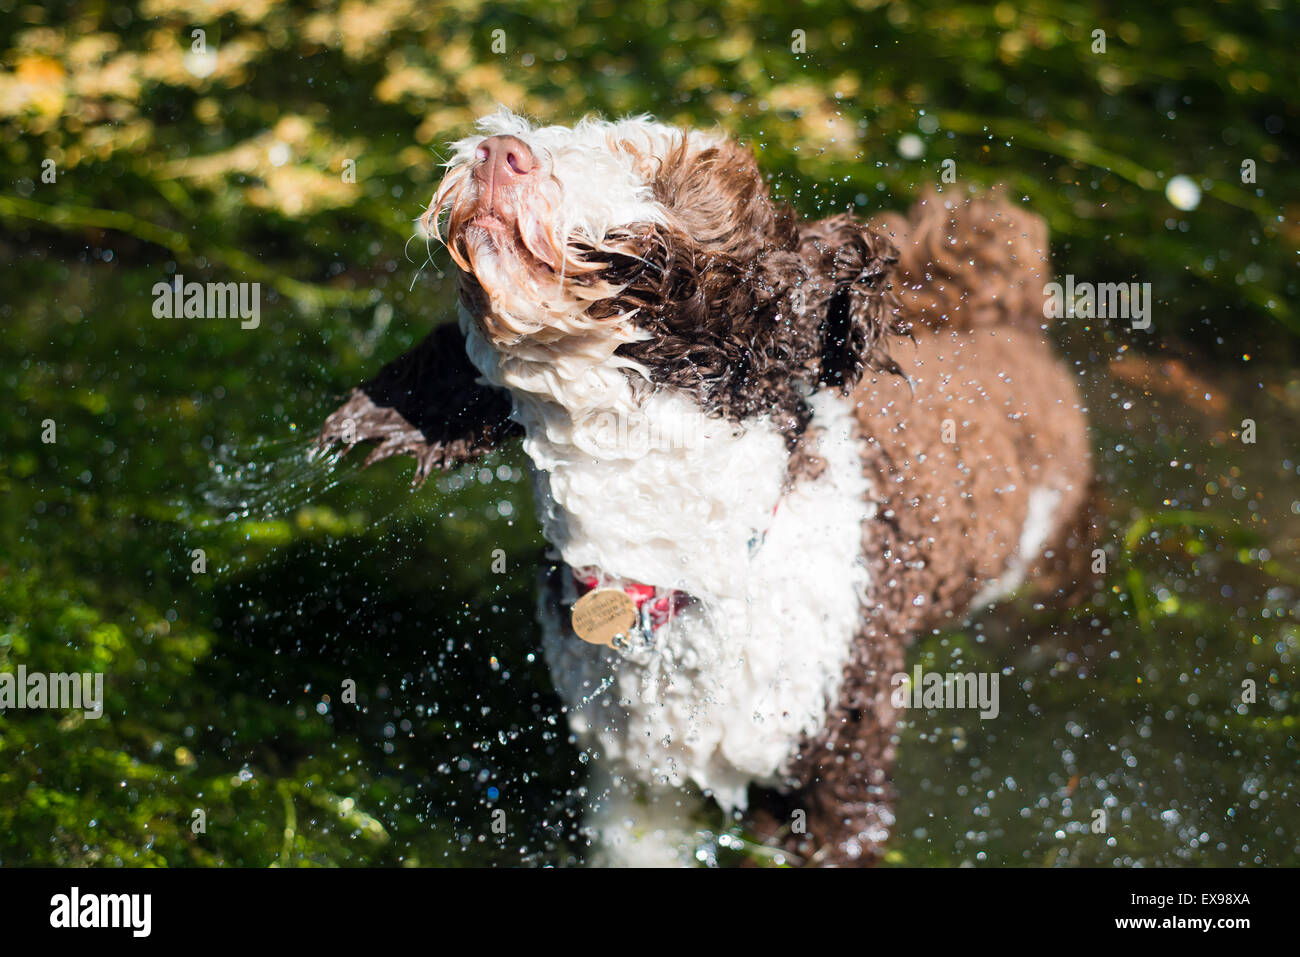 Spanish water dog shaking off water from river Stock Photo